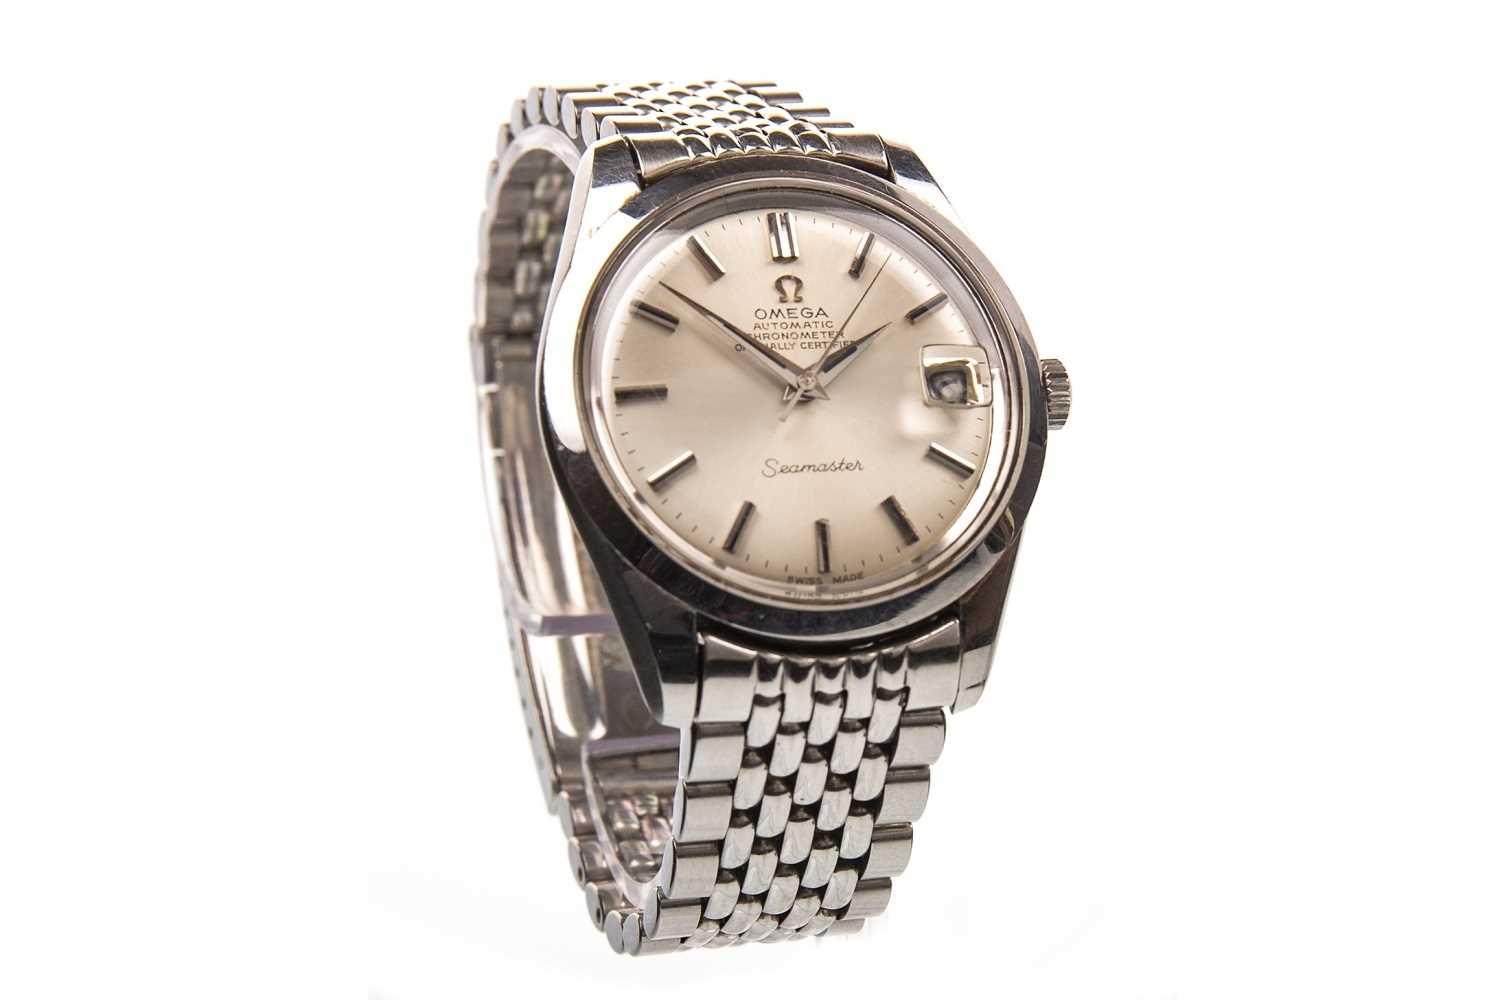 Lot 800 - A GENTLEMAN'S OMEGA SEAMASTER AUTOMATIC WATCH